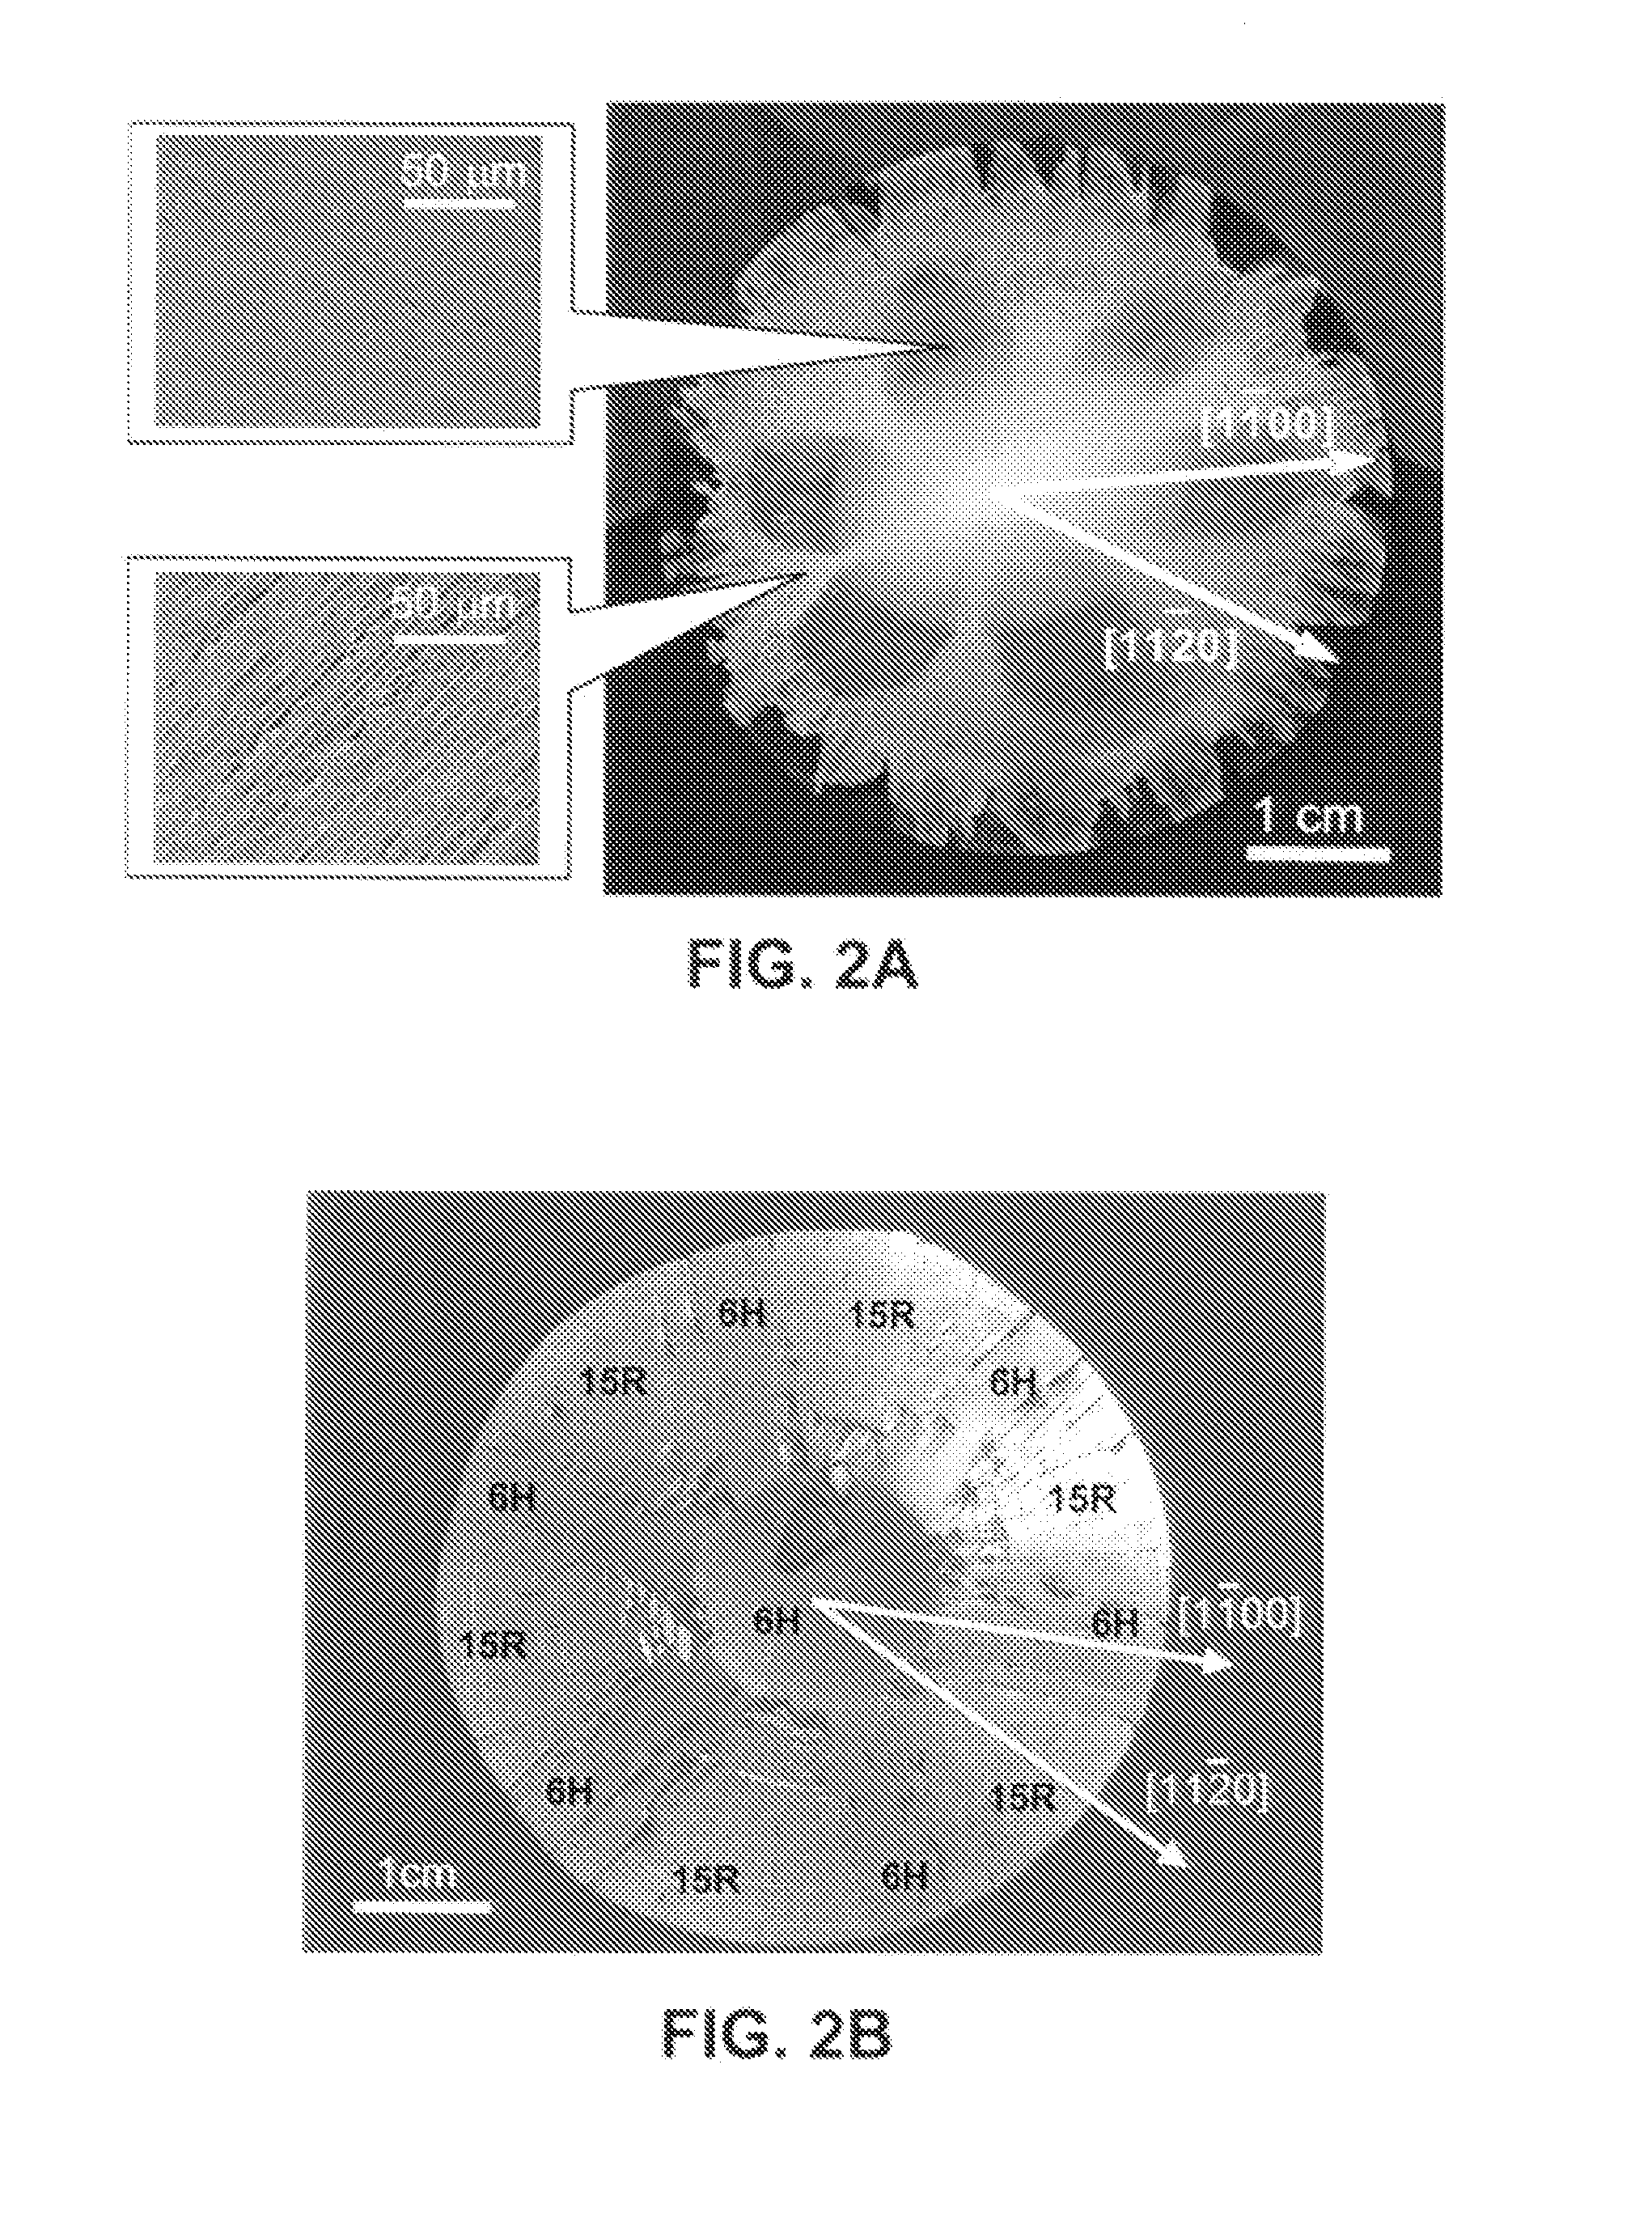 Micropipe-free silicon carbide and related method of manufacture